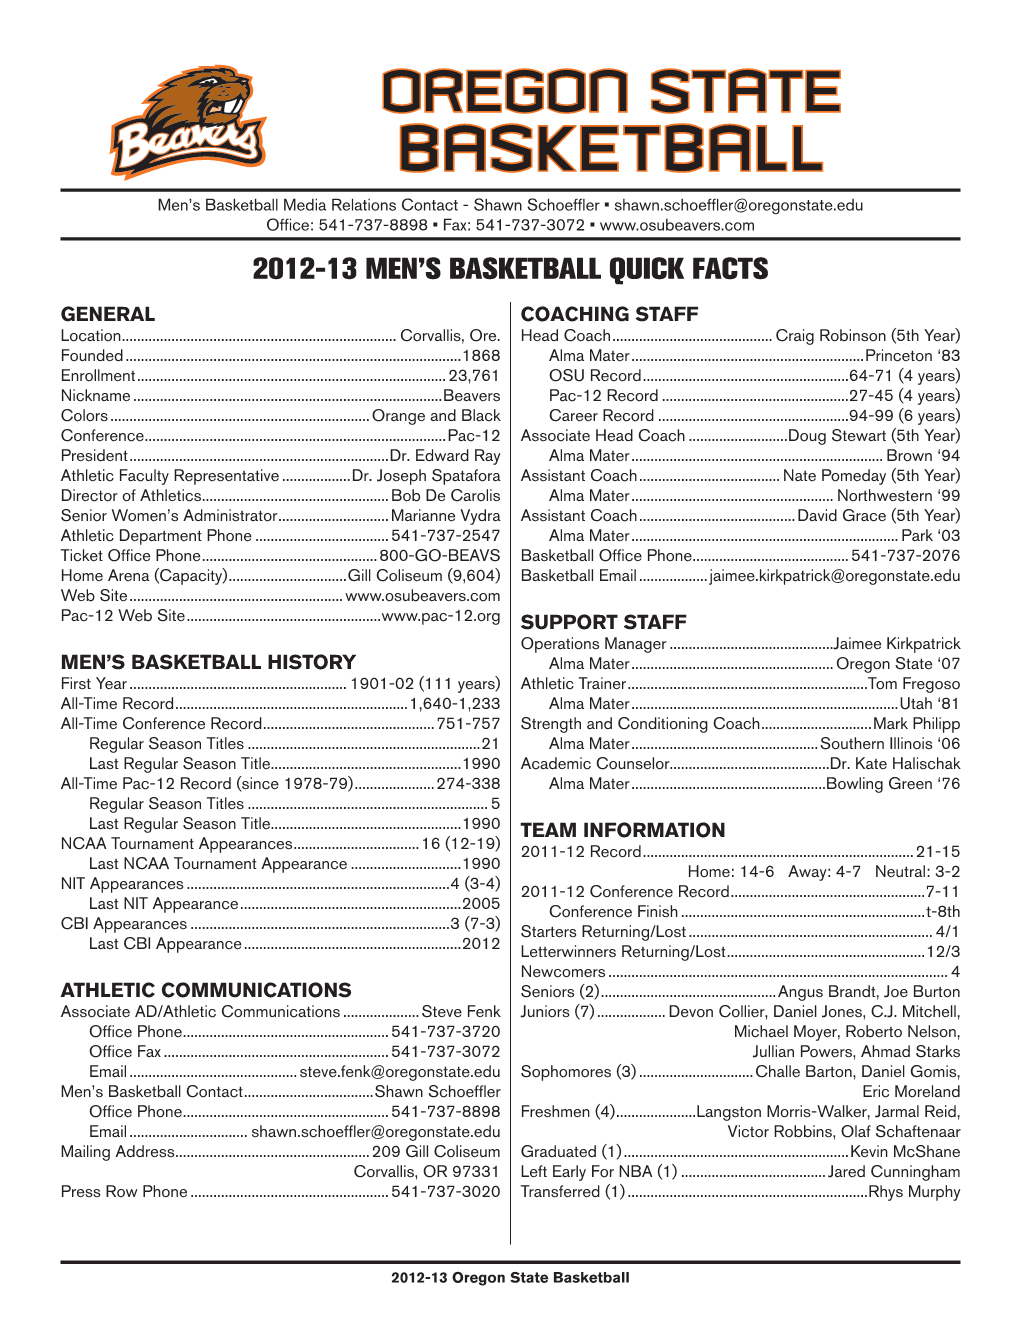 2012-13 Oregon State MBB Quick Facts.Indd